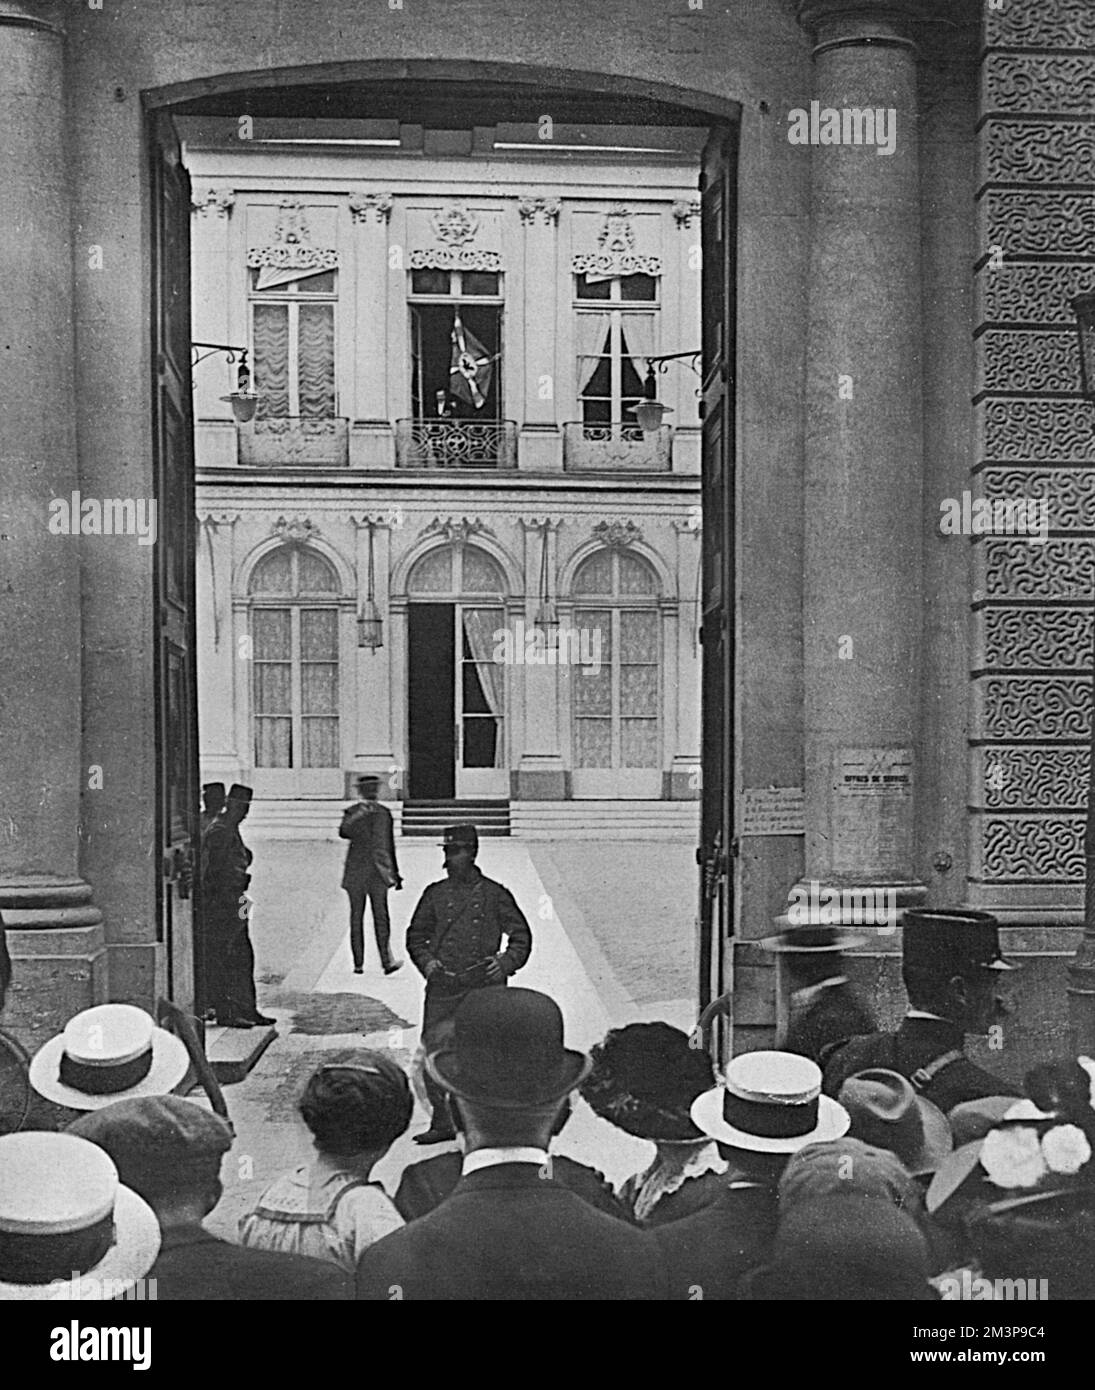 The first German Standard captured by the French is displayed in the window of the Ministry of War on the Rue St Dominique, Paris. The flag, of the German 132nd infantry regiment, was captured by the 10th battalion of 'Chasseurs &#x830;ied' at St Blaise in Alsace. The forecourt of the Ministry is guarded by soldiers to hold back the enthusiastic crowd that has gathered outside.     Date: August 1914 Stock Photo